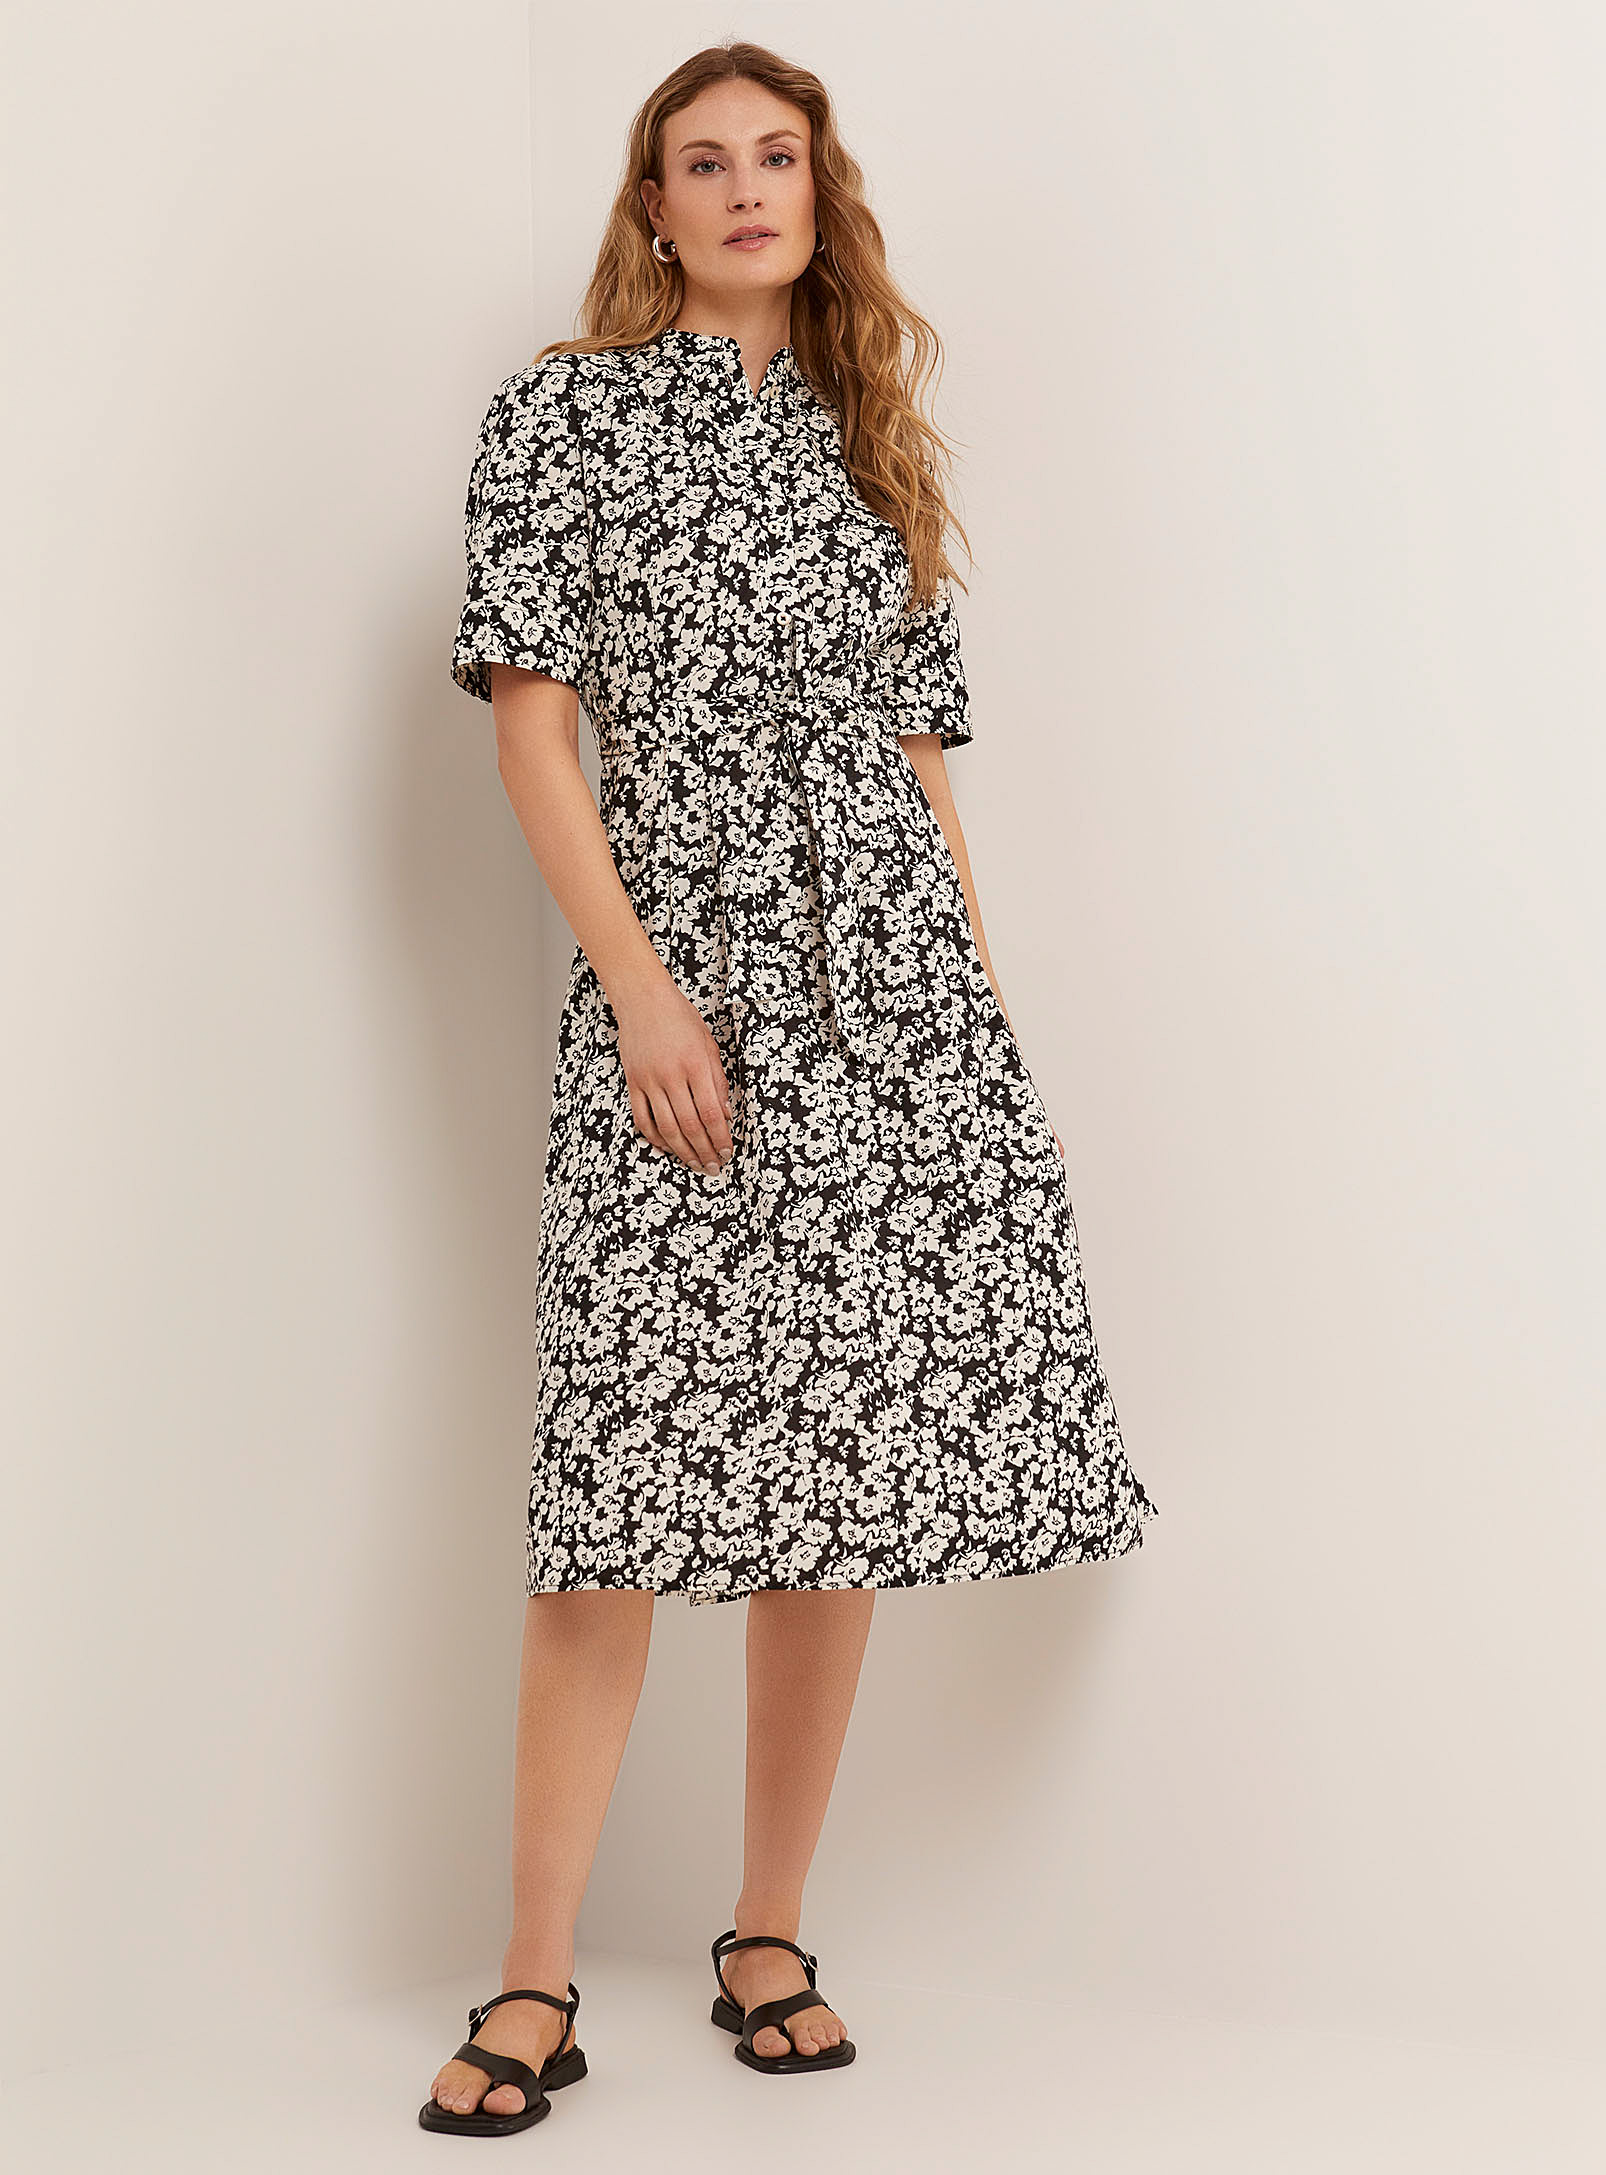 Marc O'polo Bright Garden Shirtdress In Black And White